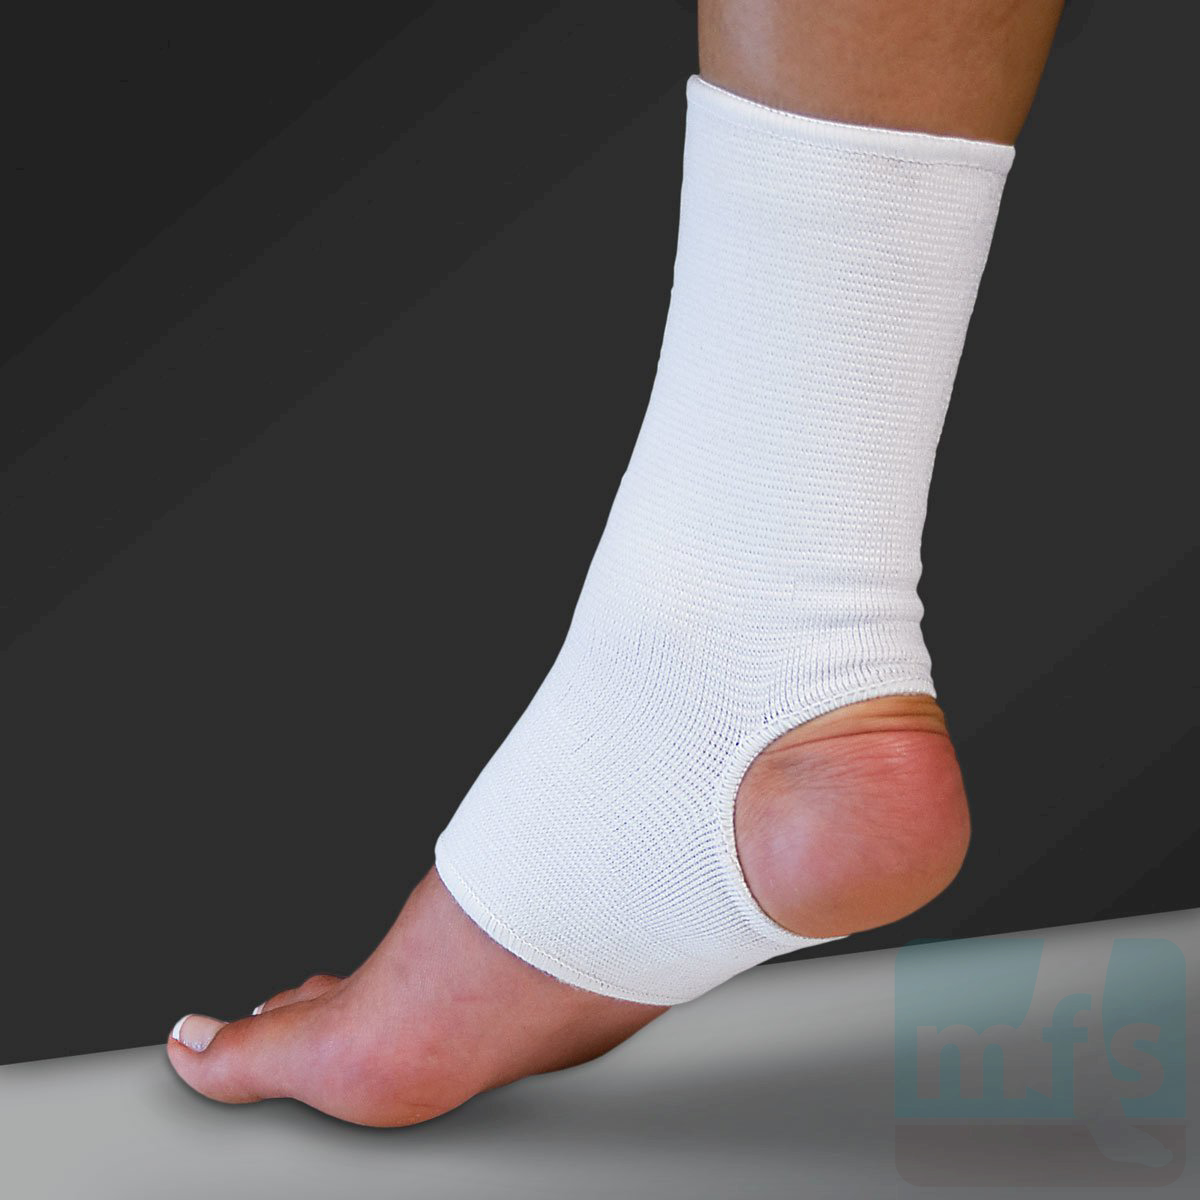 https://www.myfootshop.com/images/thumbs/w_1_0001723_ankle-support-elastic.jpeg